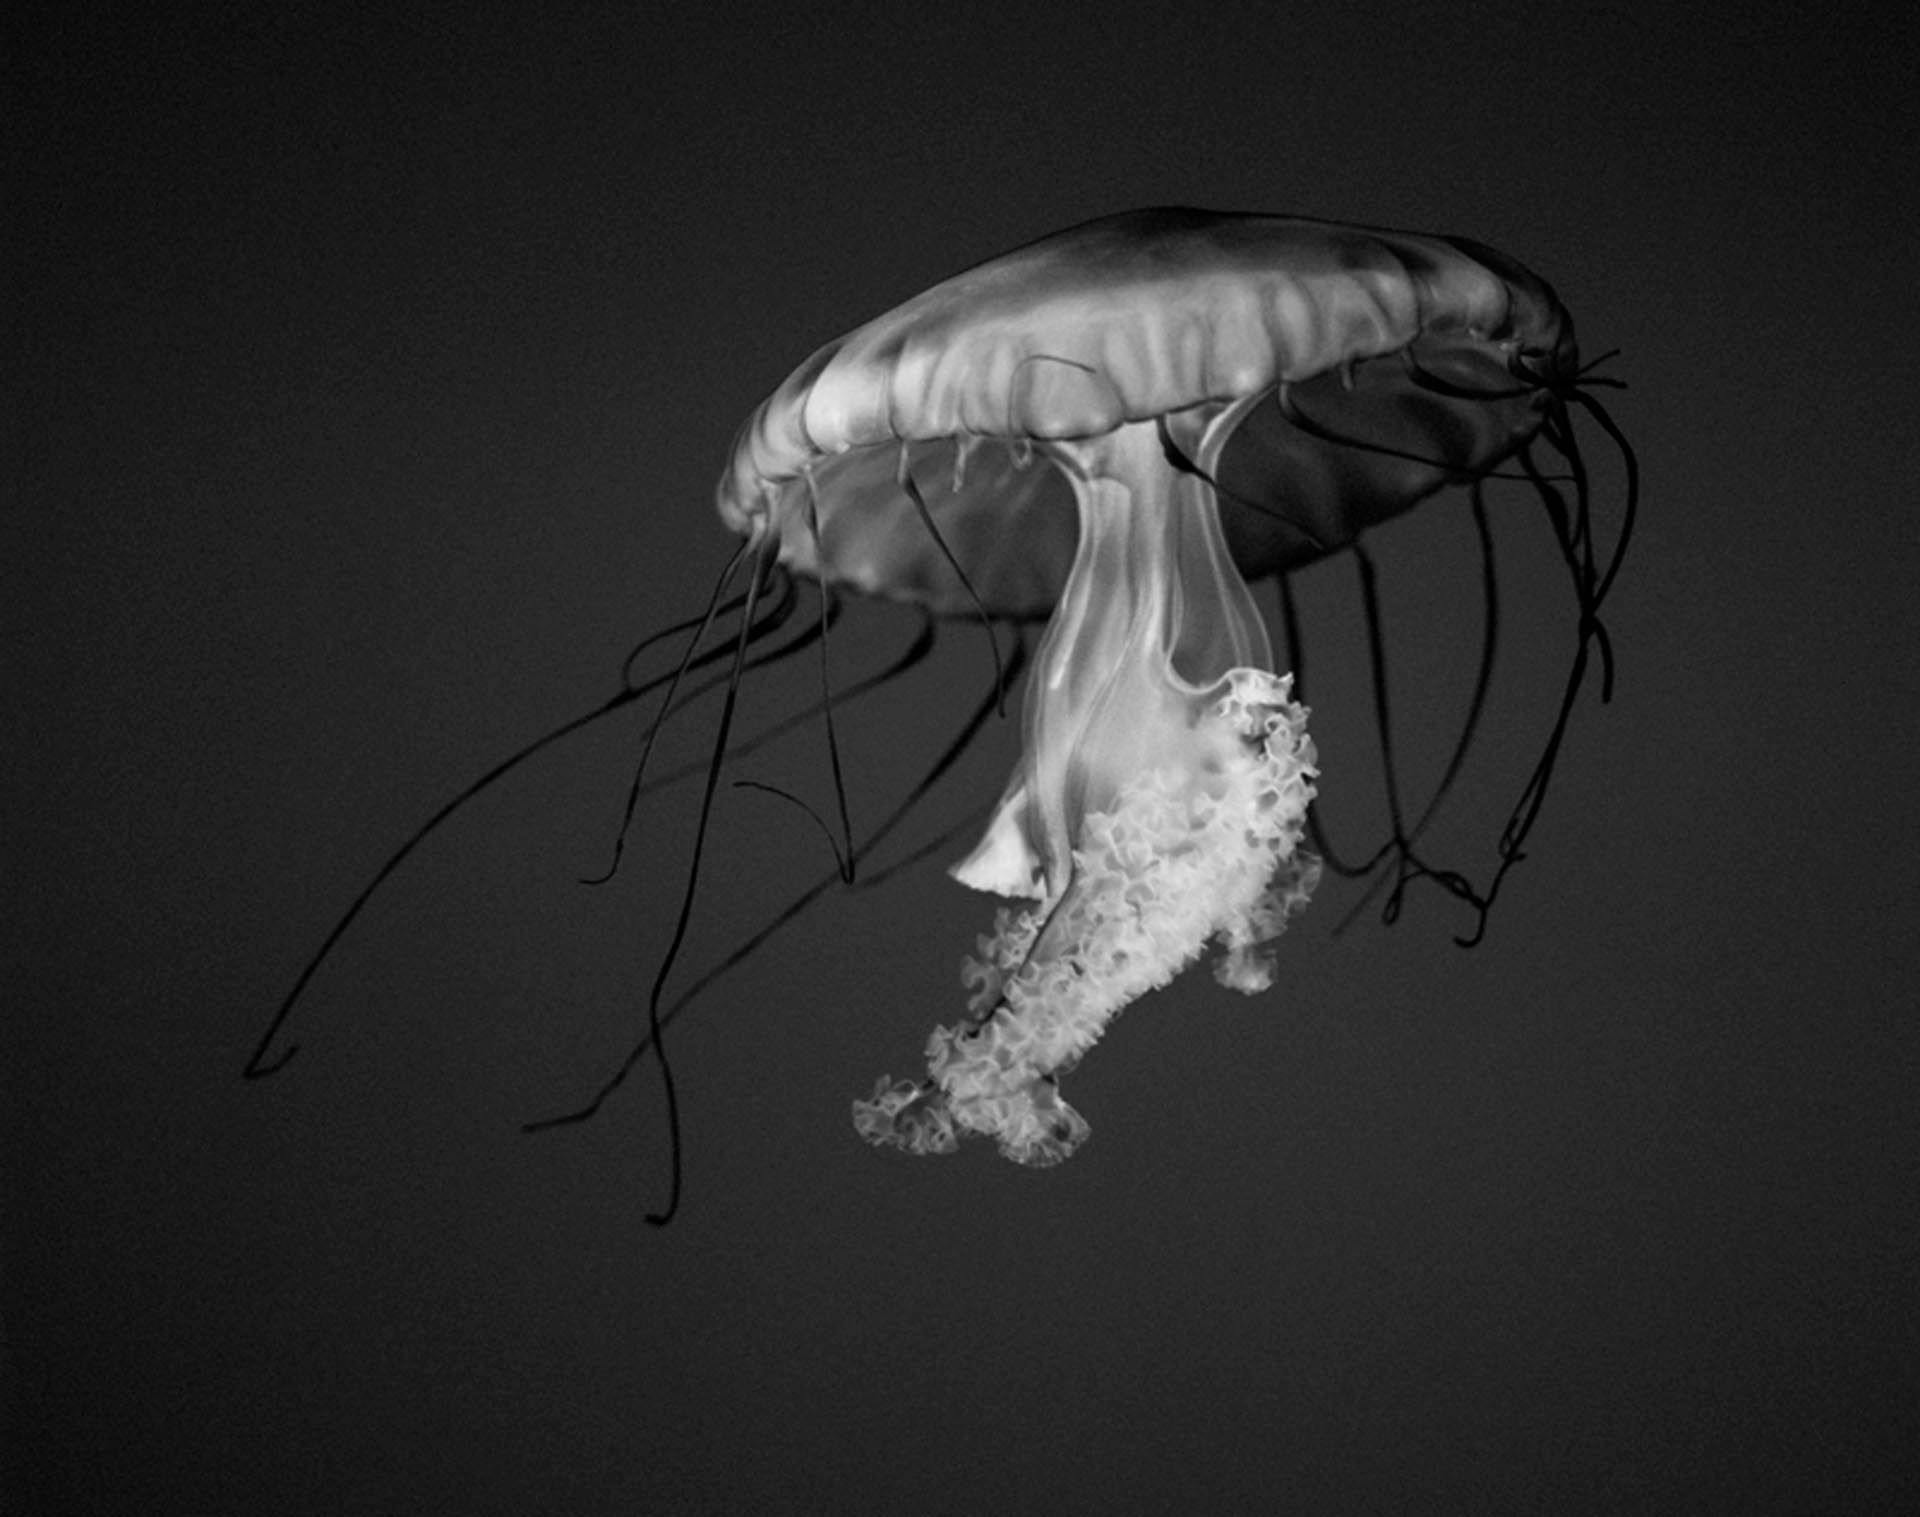 A photograph by Christopher Williams titled Pacific Sea Nettle, Chrysaora Melanaster, Long Beach Aquarium of the Pacific, 100 Aquarium Way, Long Beach, California, August 9, 2005.